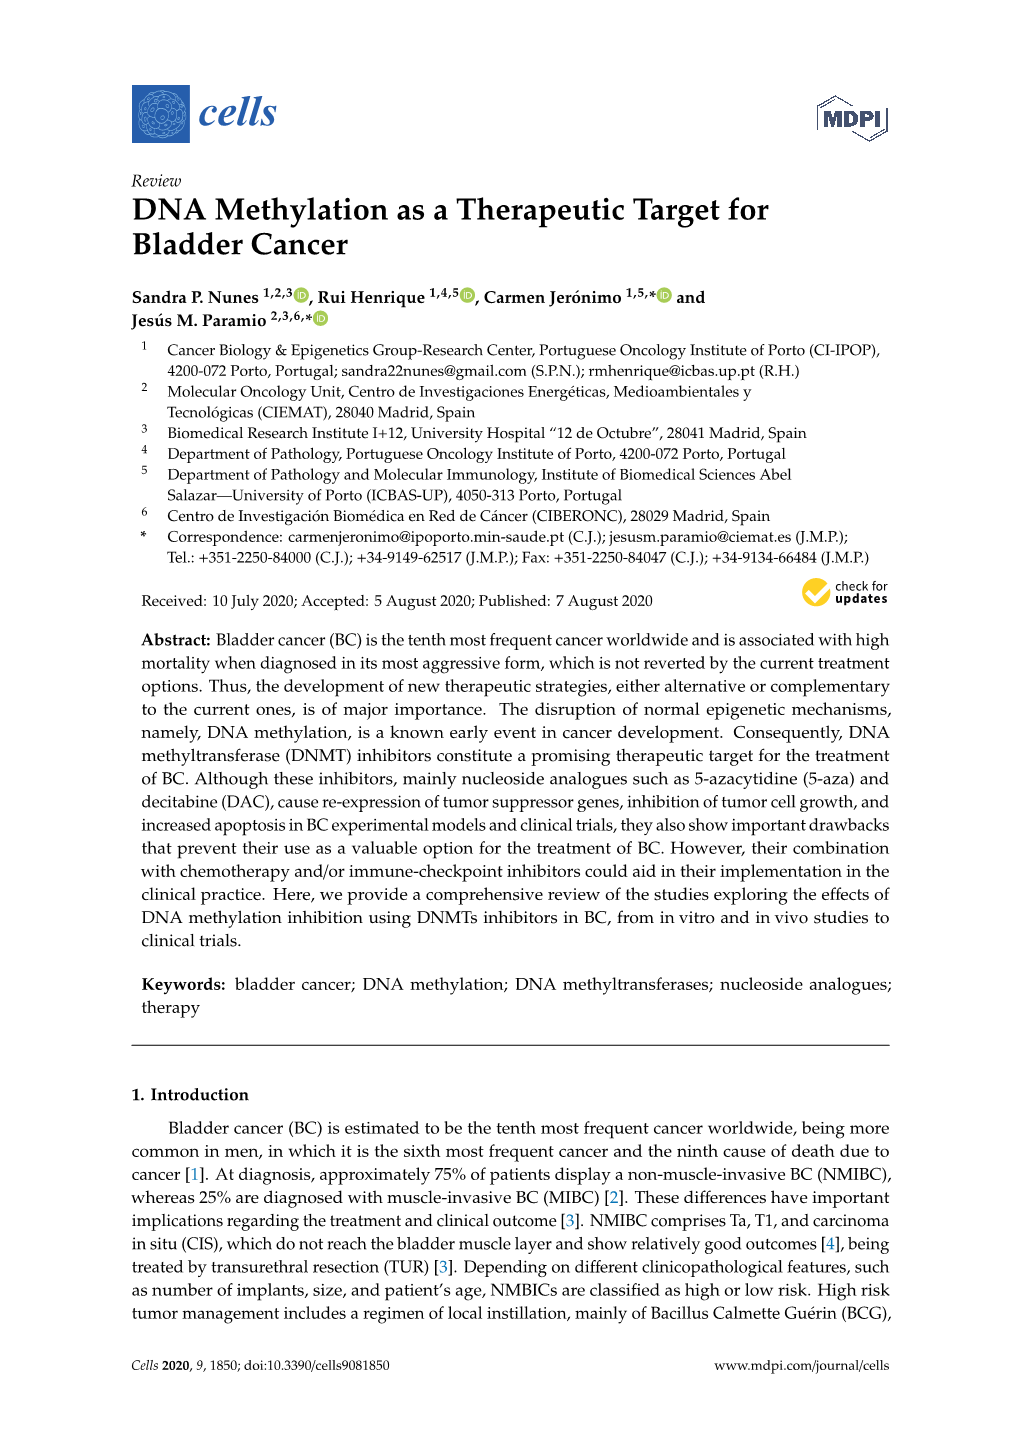 DNA Methylation As a Therapeutic Target for Bladder Cancer